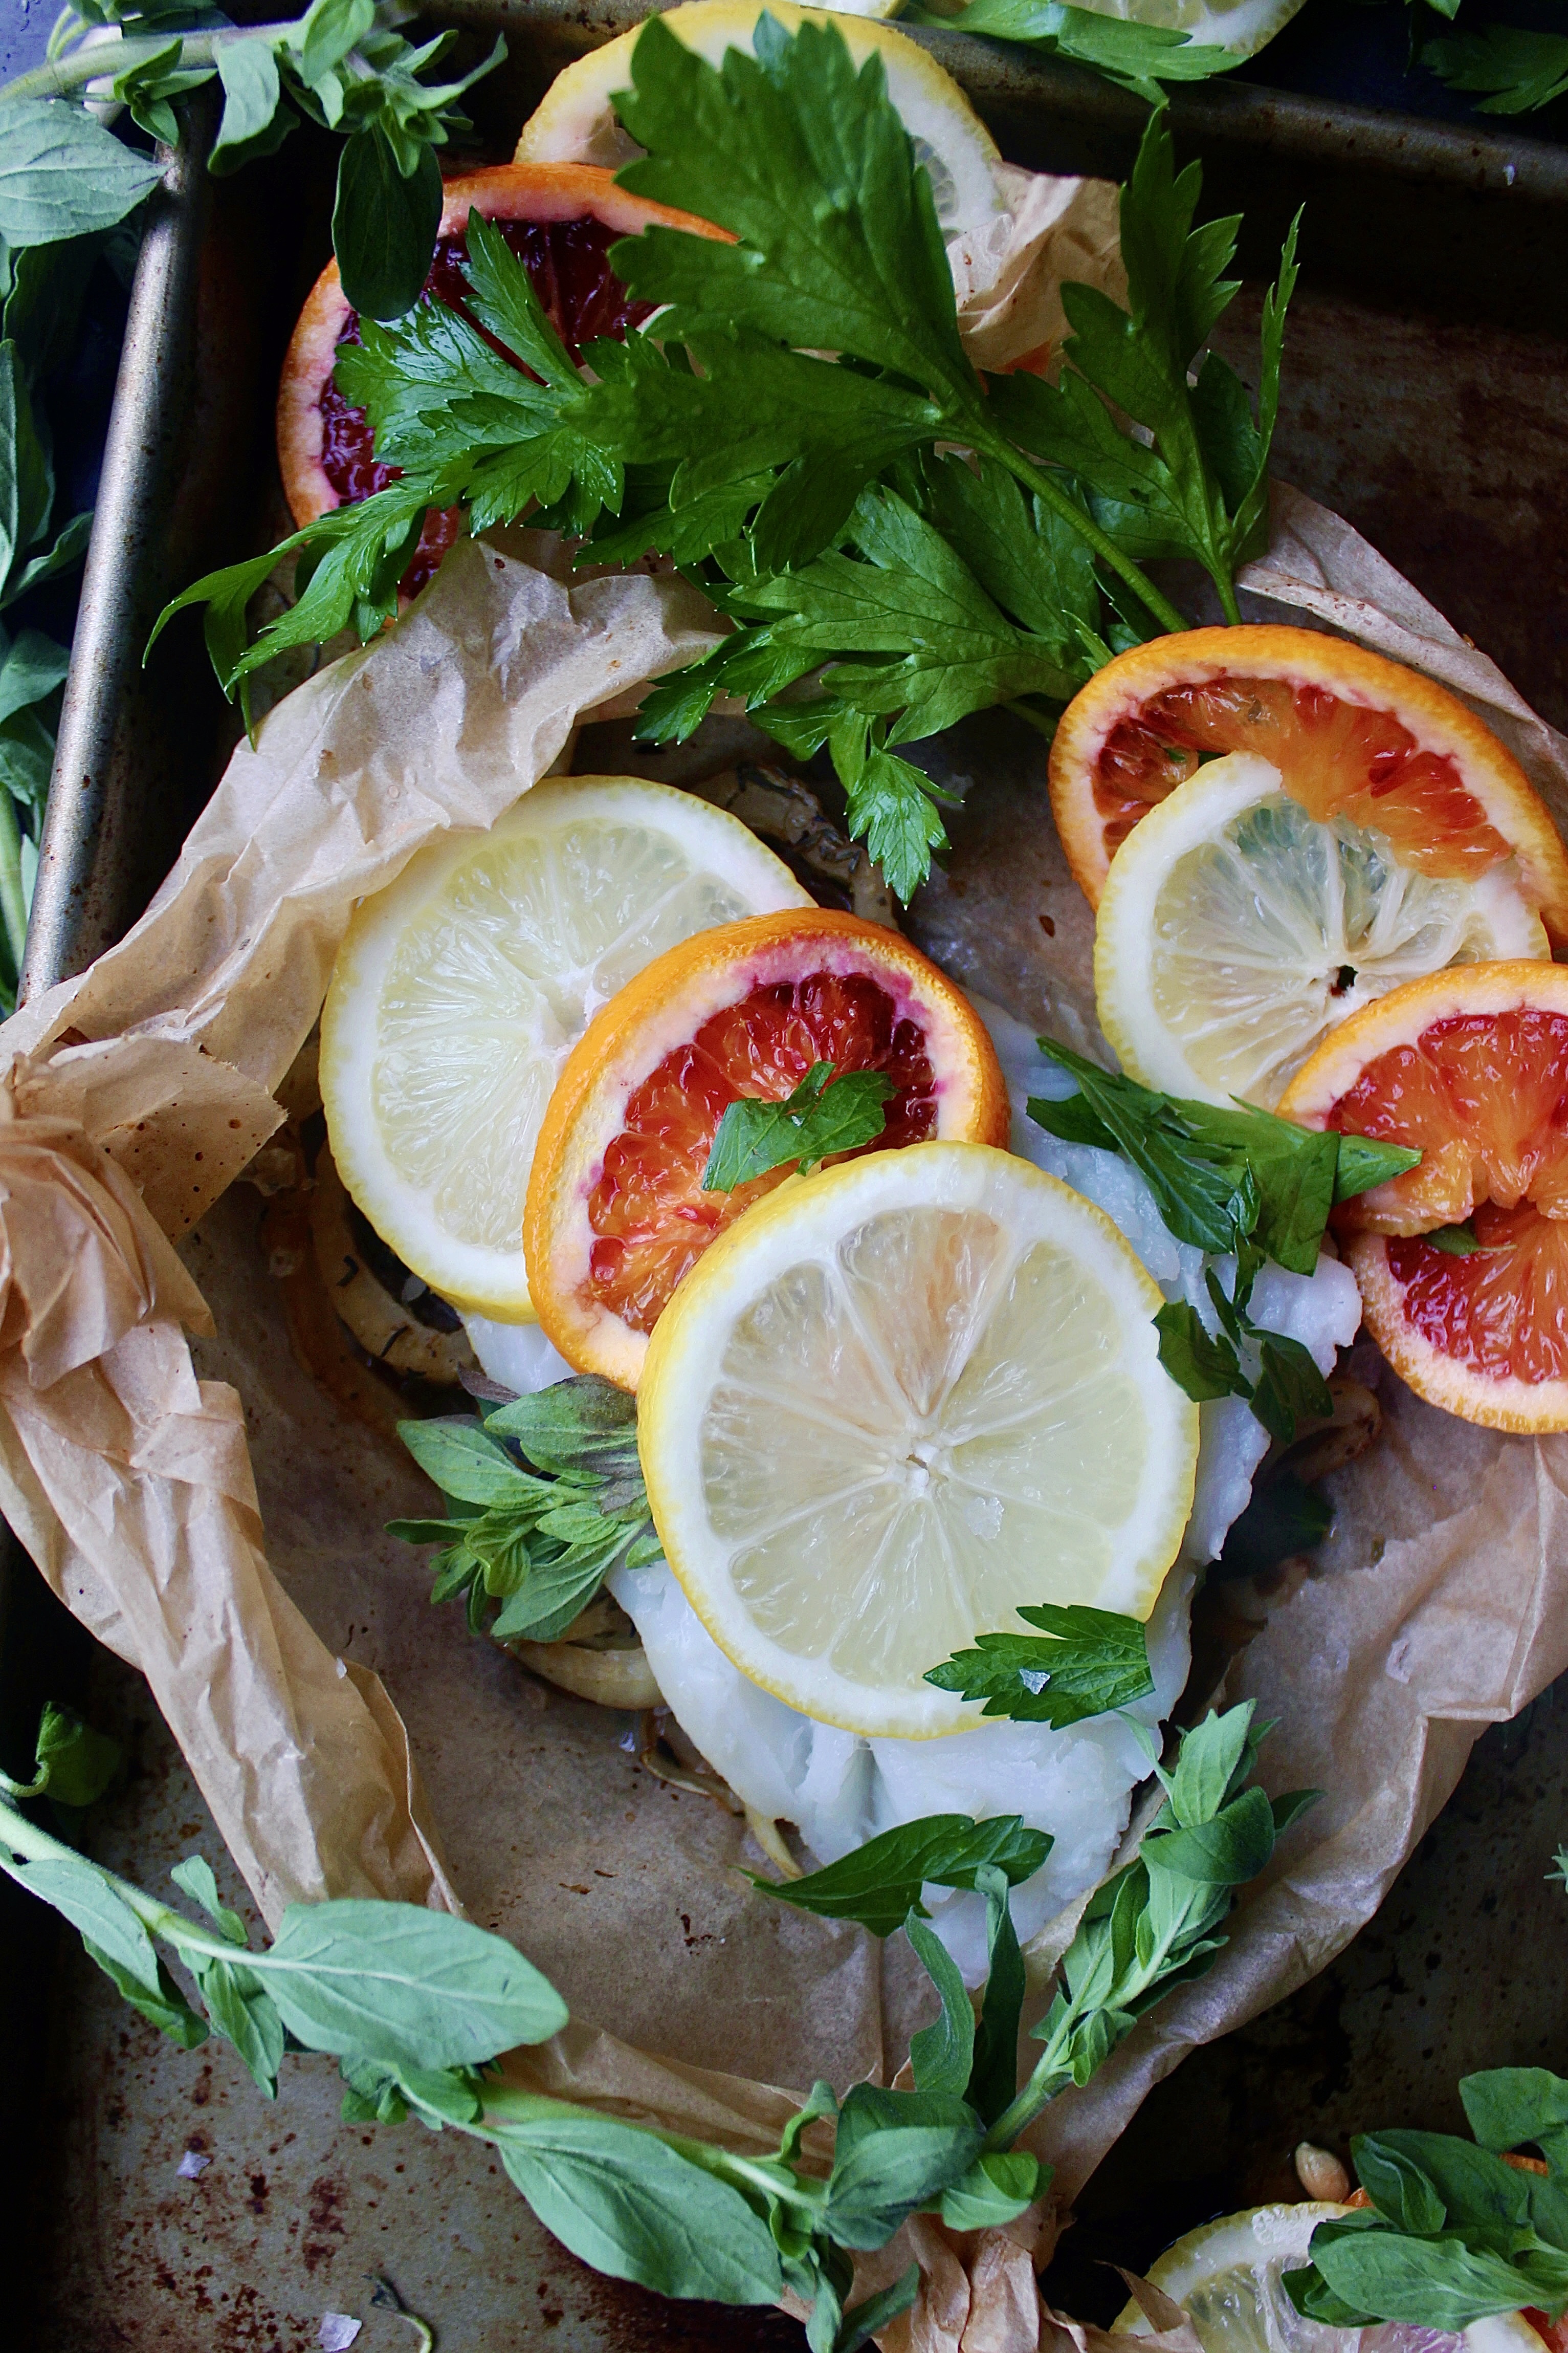 White wine caramelized fennel and shallots under a flaky white fish with layers of blood orange and lemon all tucked into a folded parchment square: this Citrus Fennel Baked Fish en Papillote is truly a package of flavor!